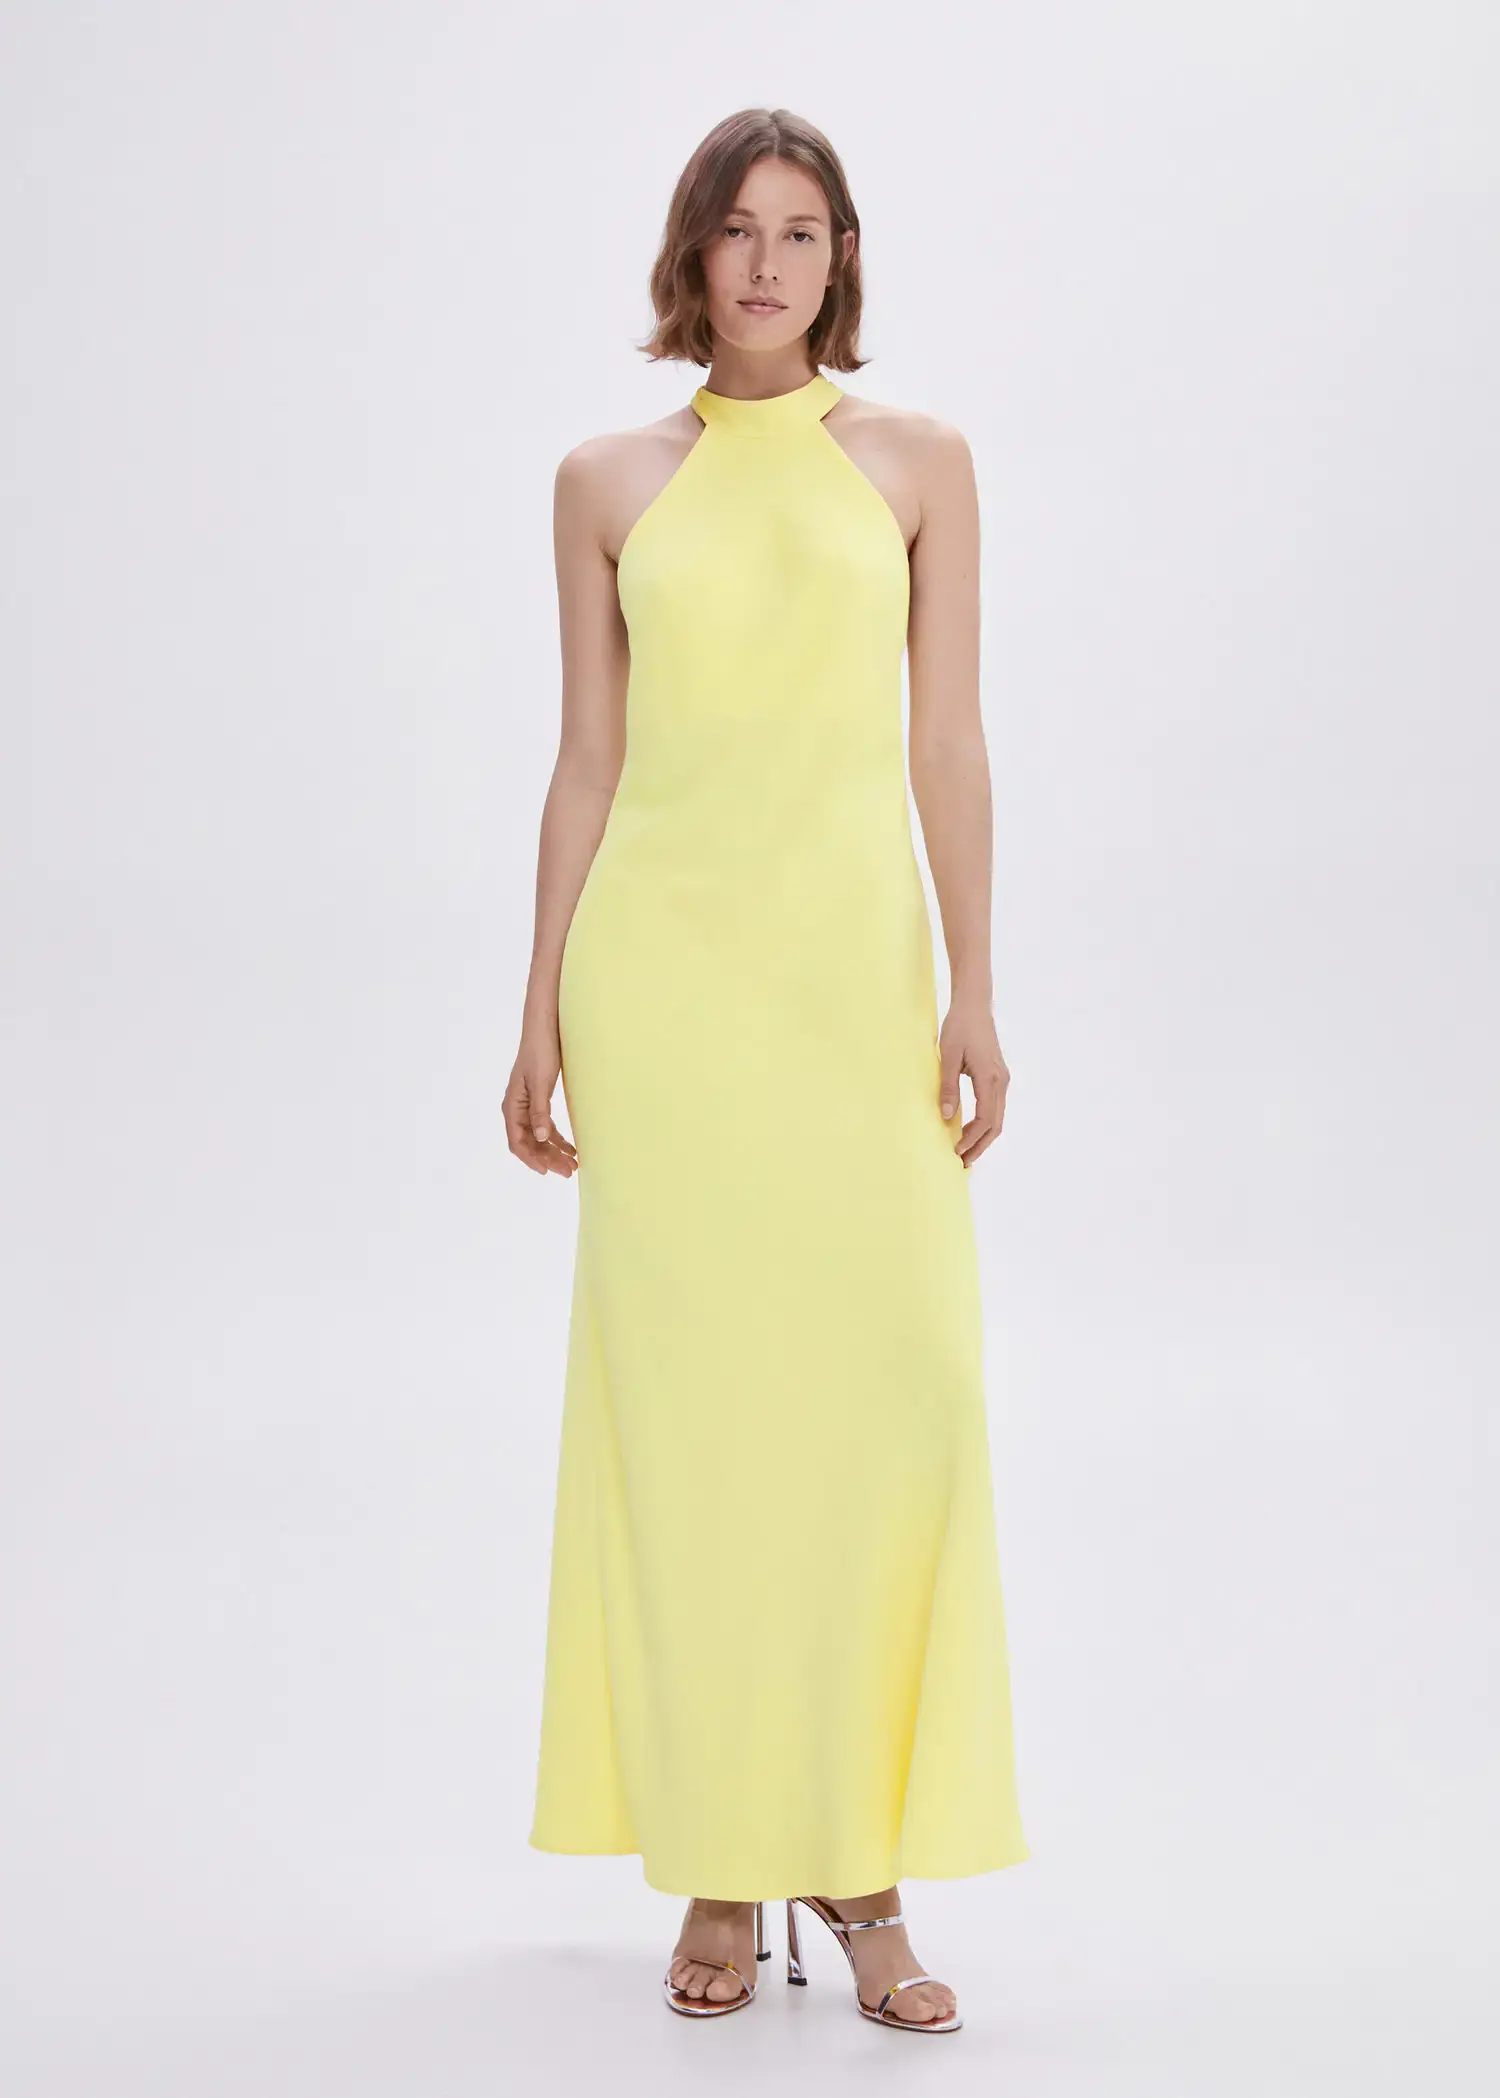 Mango Halter-neck open-back dress. a woman in a yellow dress standing in front of a white wall. 